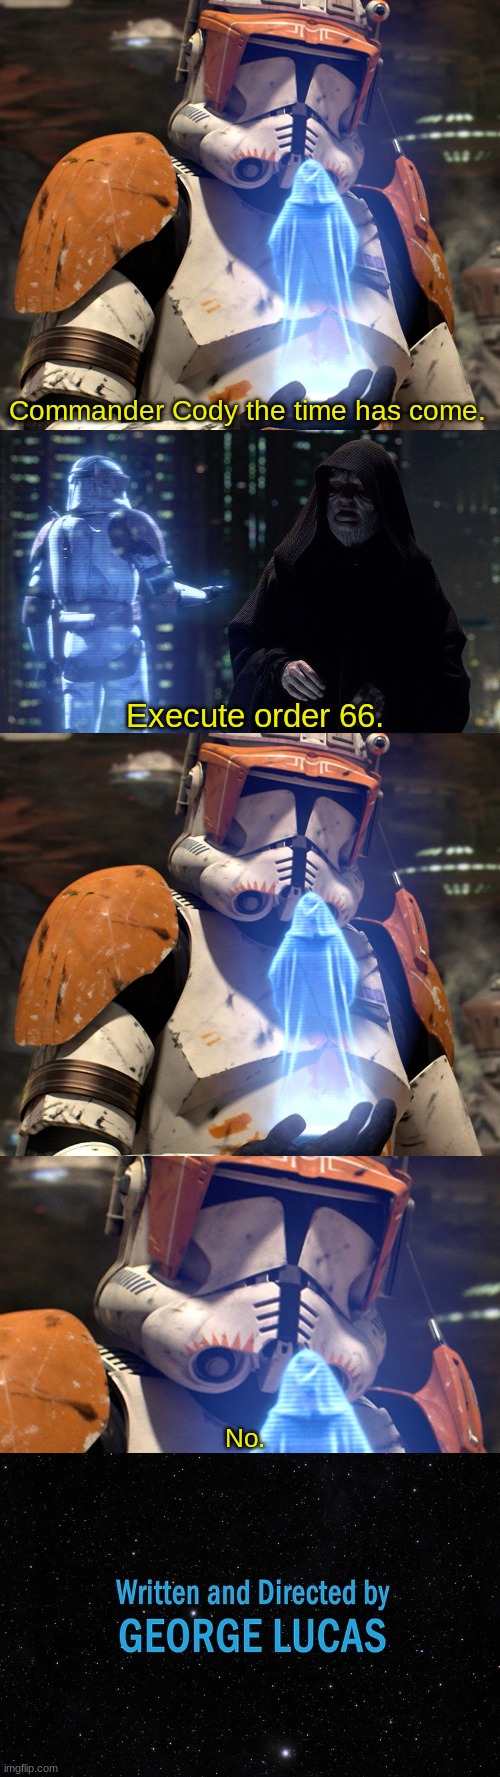 execute order 66 | Commander Cody the time has come. Execute order 66. No. | image tagged in memes,star wars,execute order 66,george lucas,no,palpatine | made w/ Imgflip meme maker